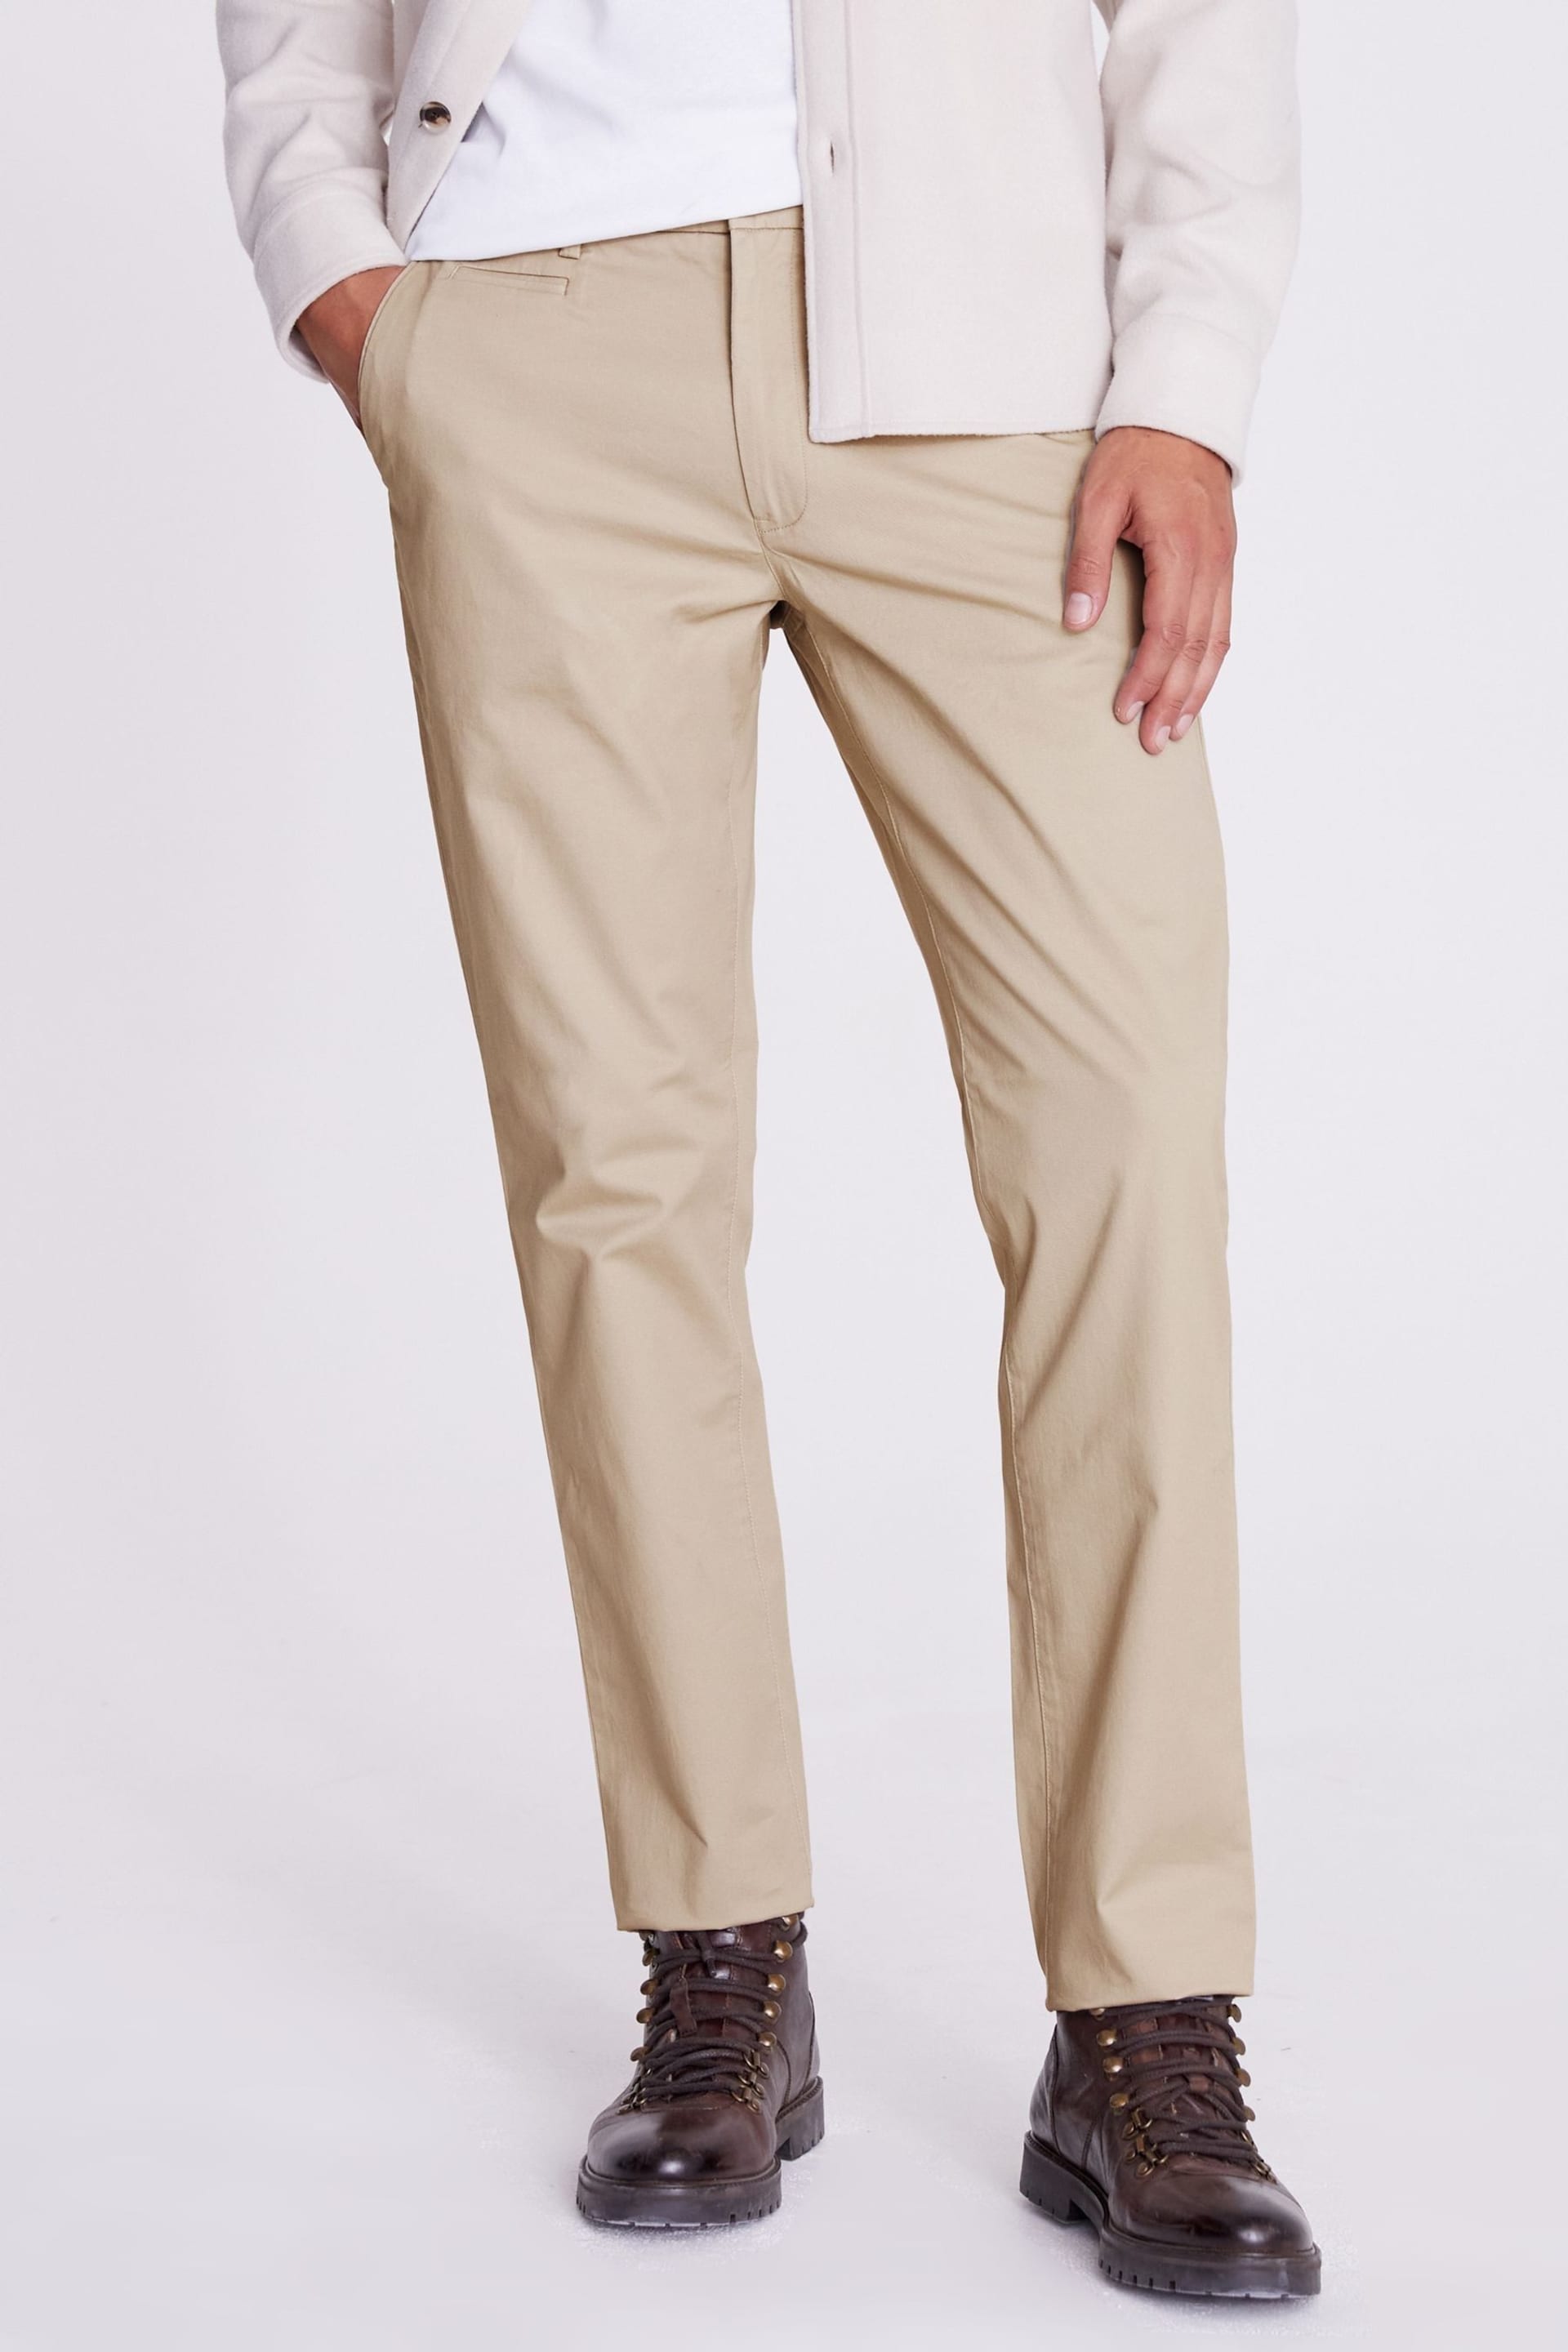 MOSS Natural Tailored Chino Trousers - Image 1 of 4